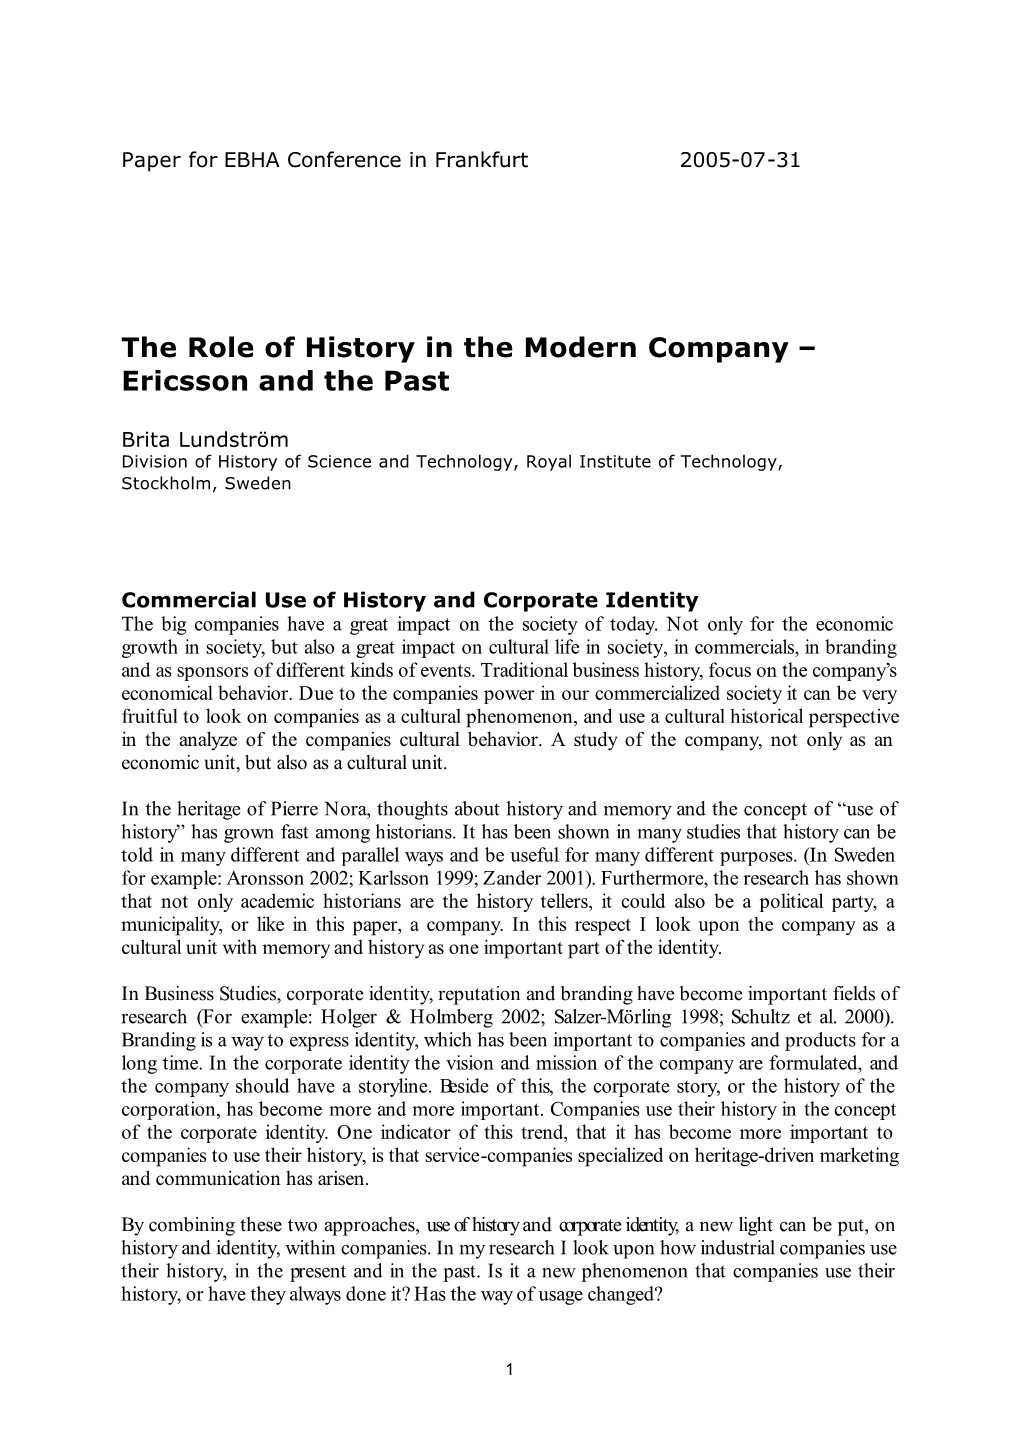 The Role of History in the Modern Company – Ericsson and the Past